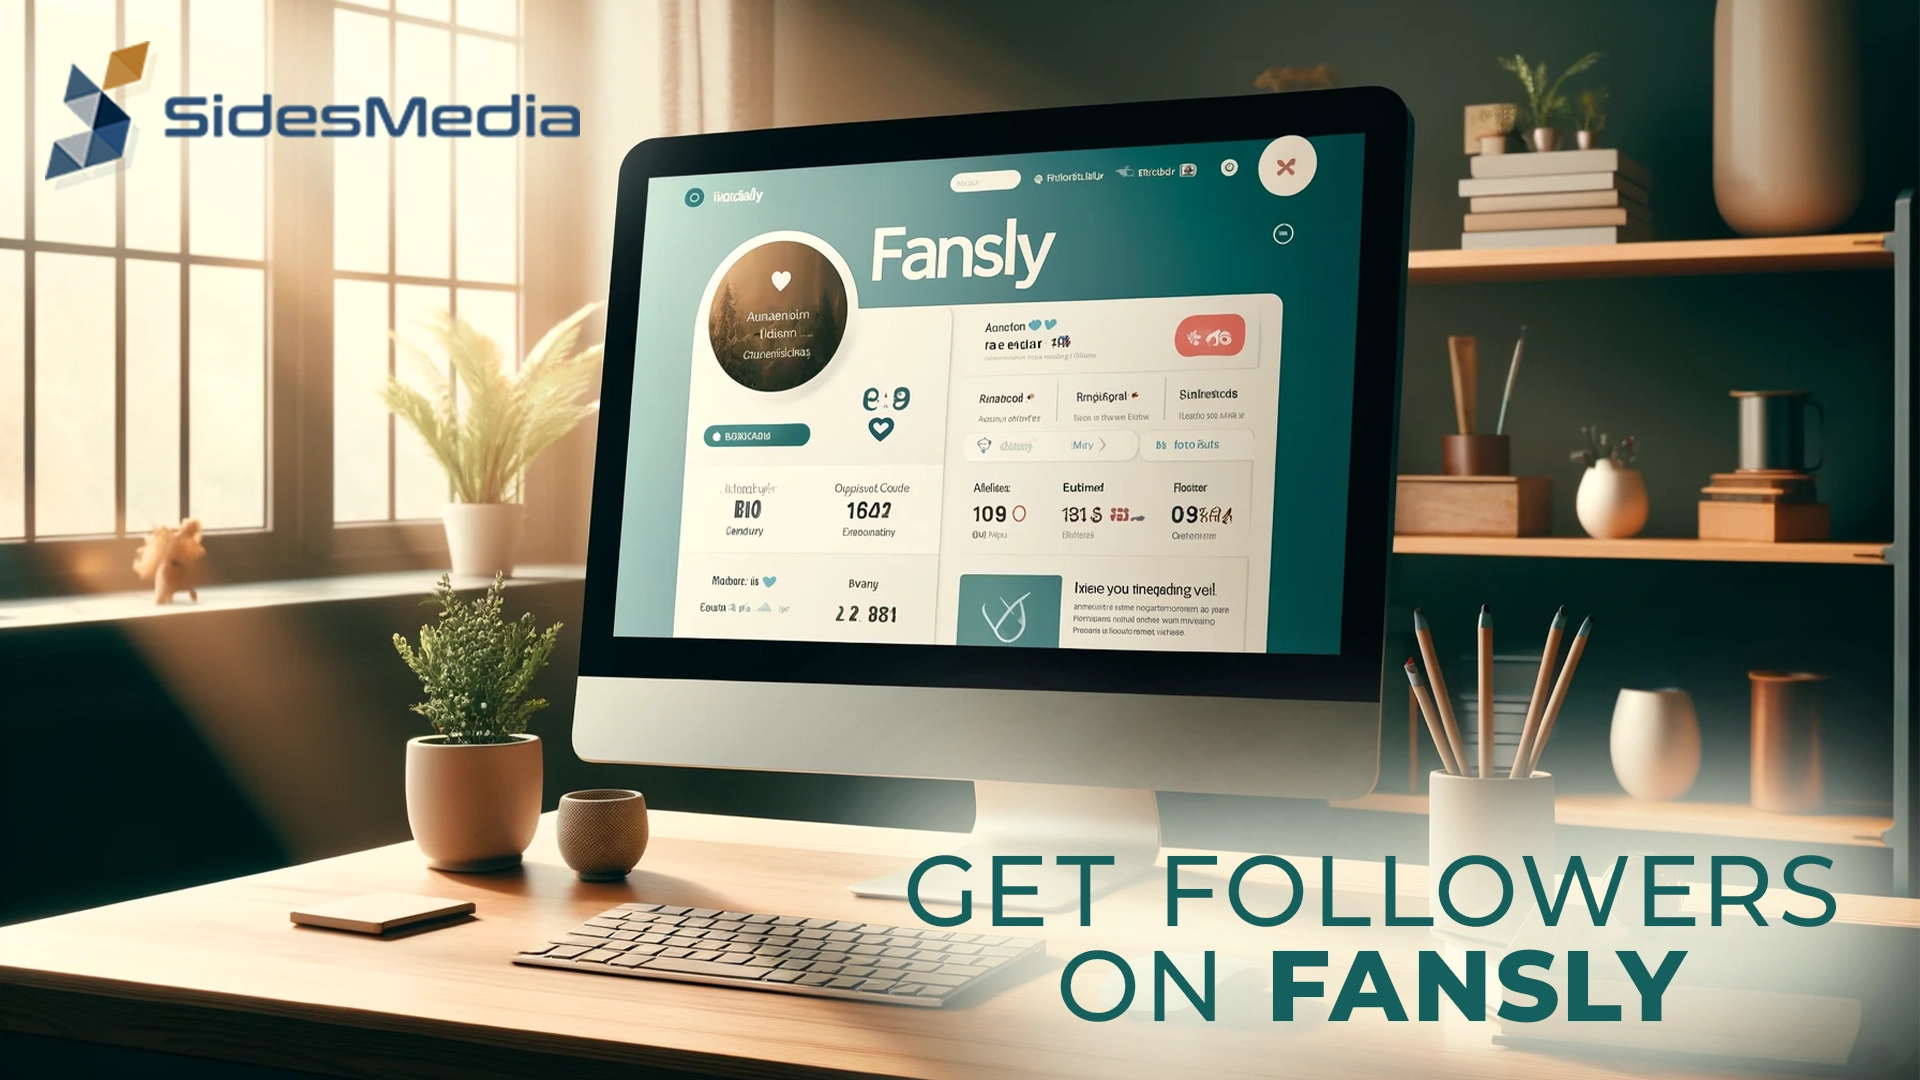 7 Best Ways: How to Get More Followers on Fansly